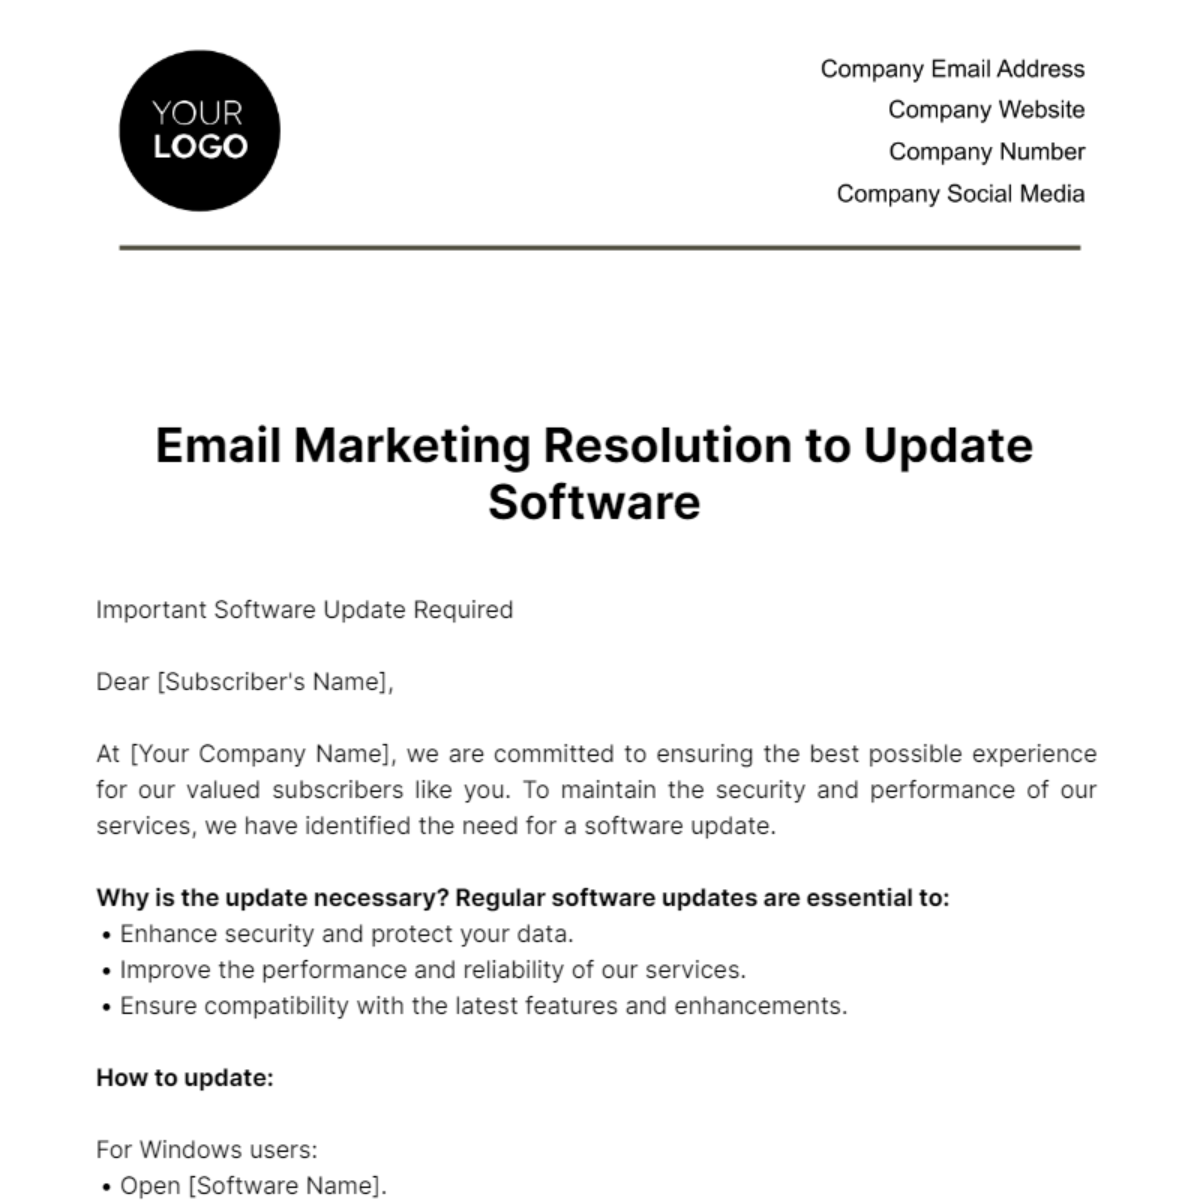 Free Email Marketing Resolution to Update Software Template